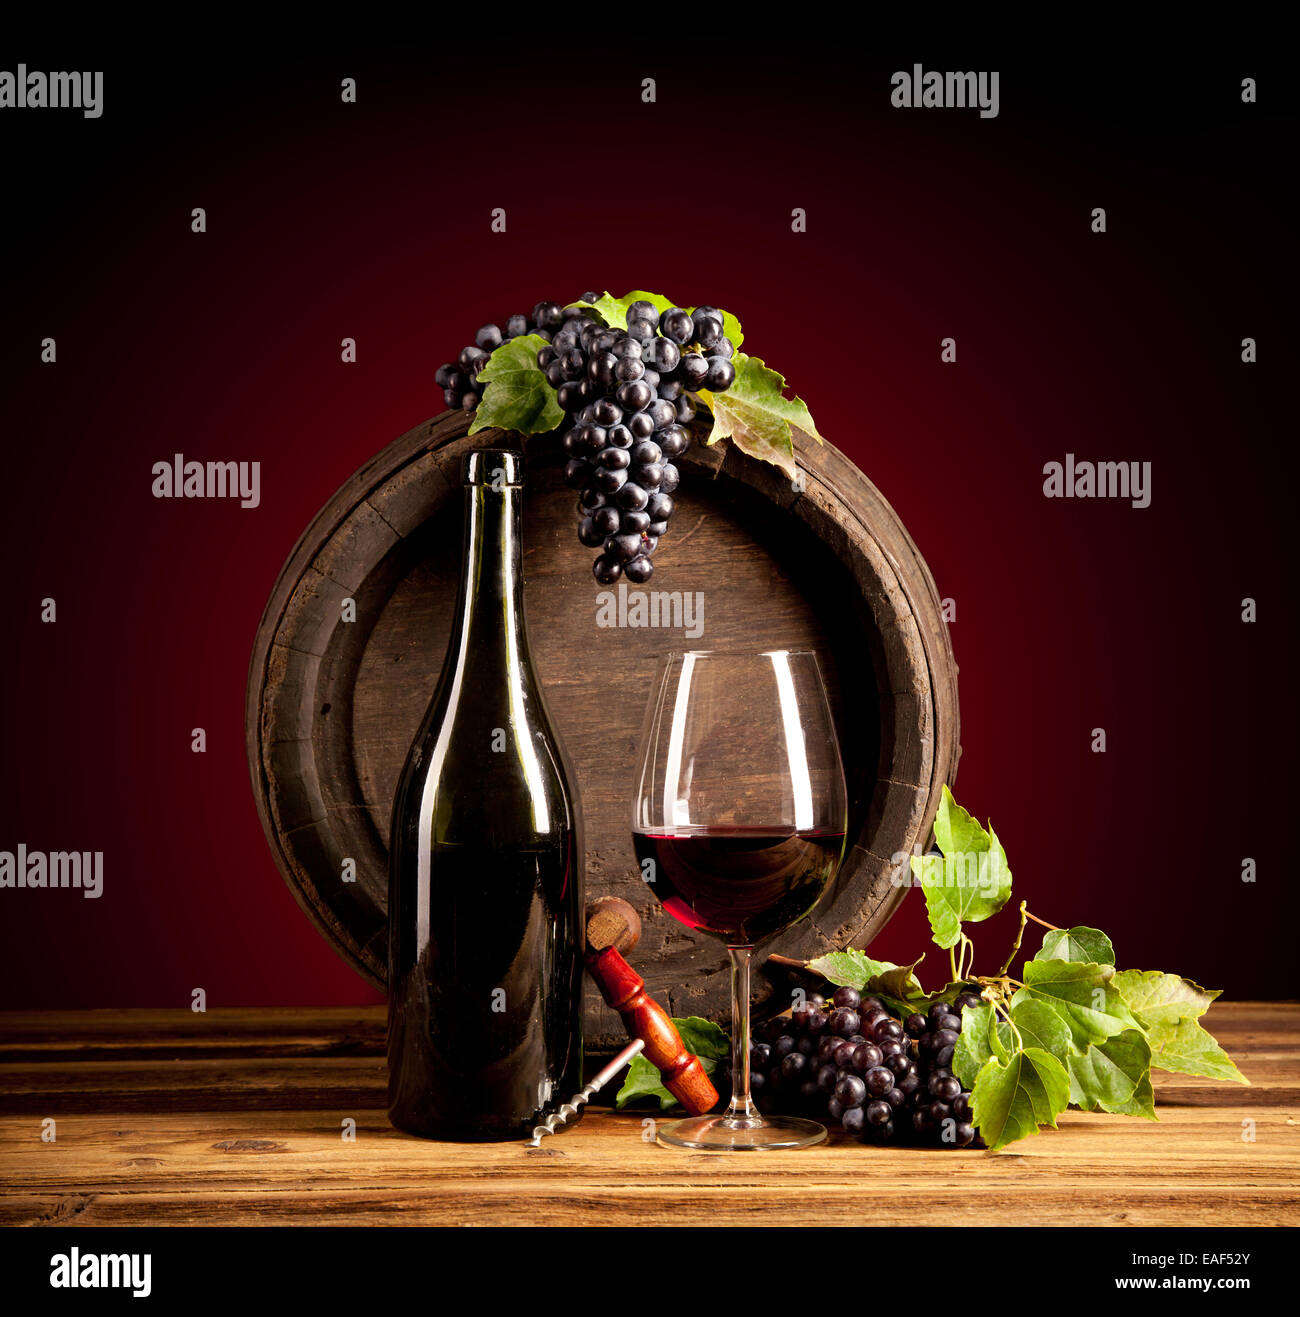 Still life of wine with wooden keg Stock Photo